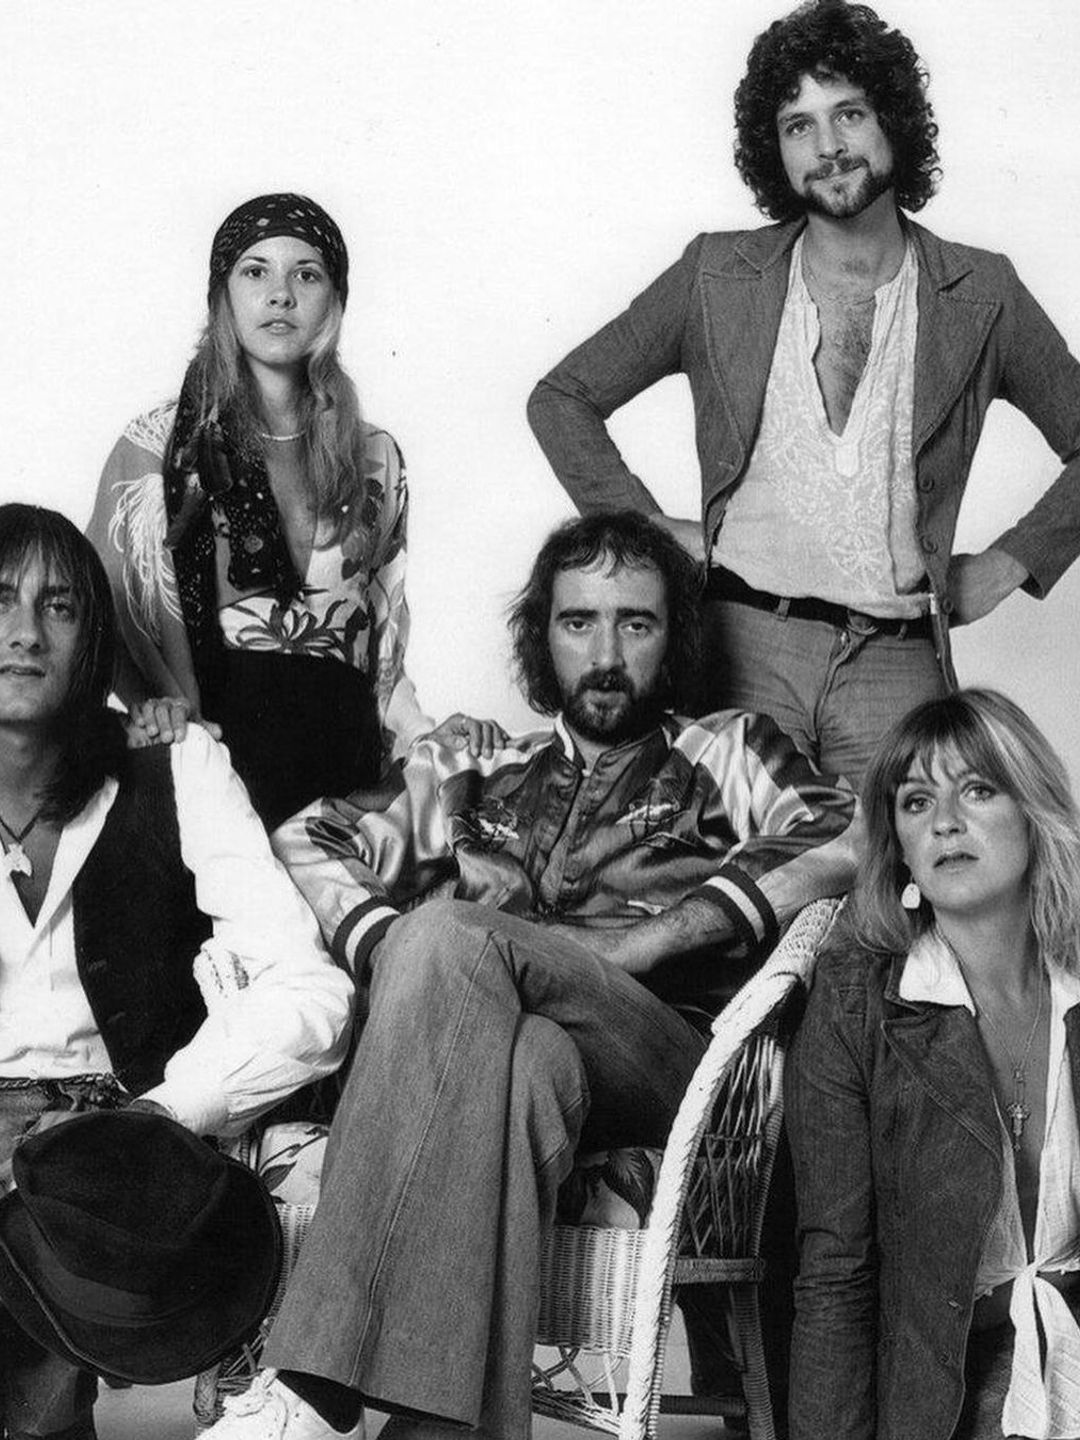 The band Fleetwood Mac in 1975